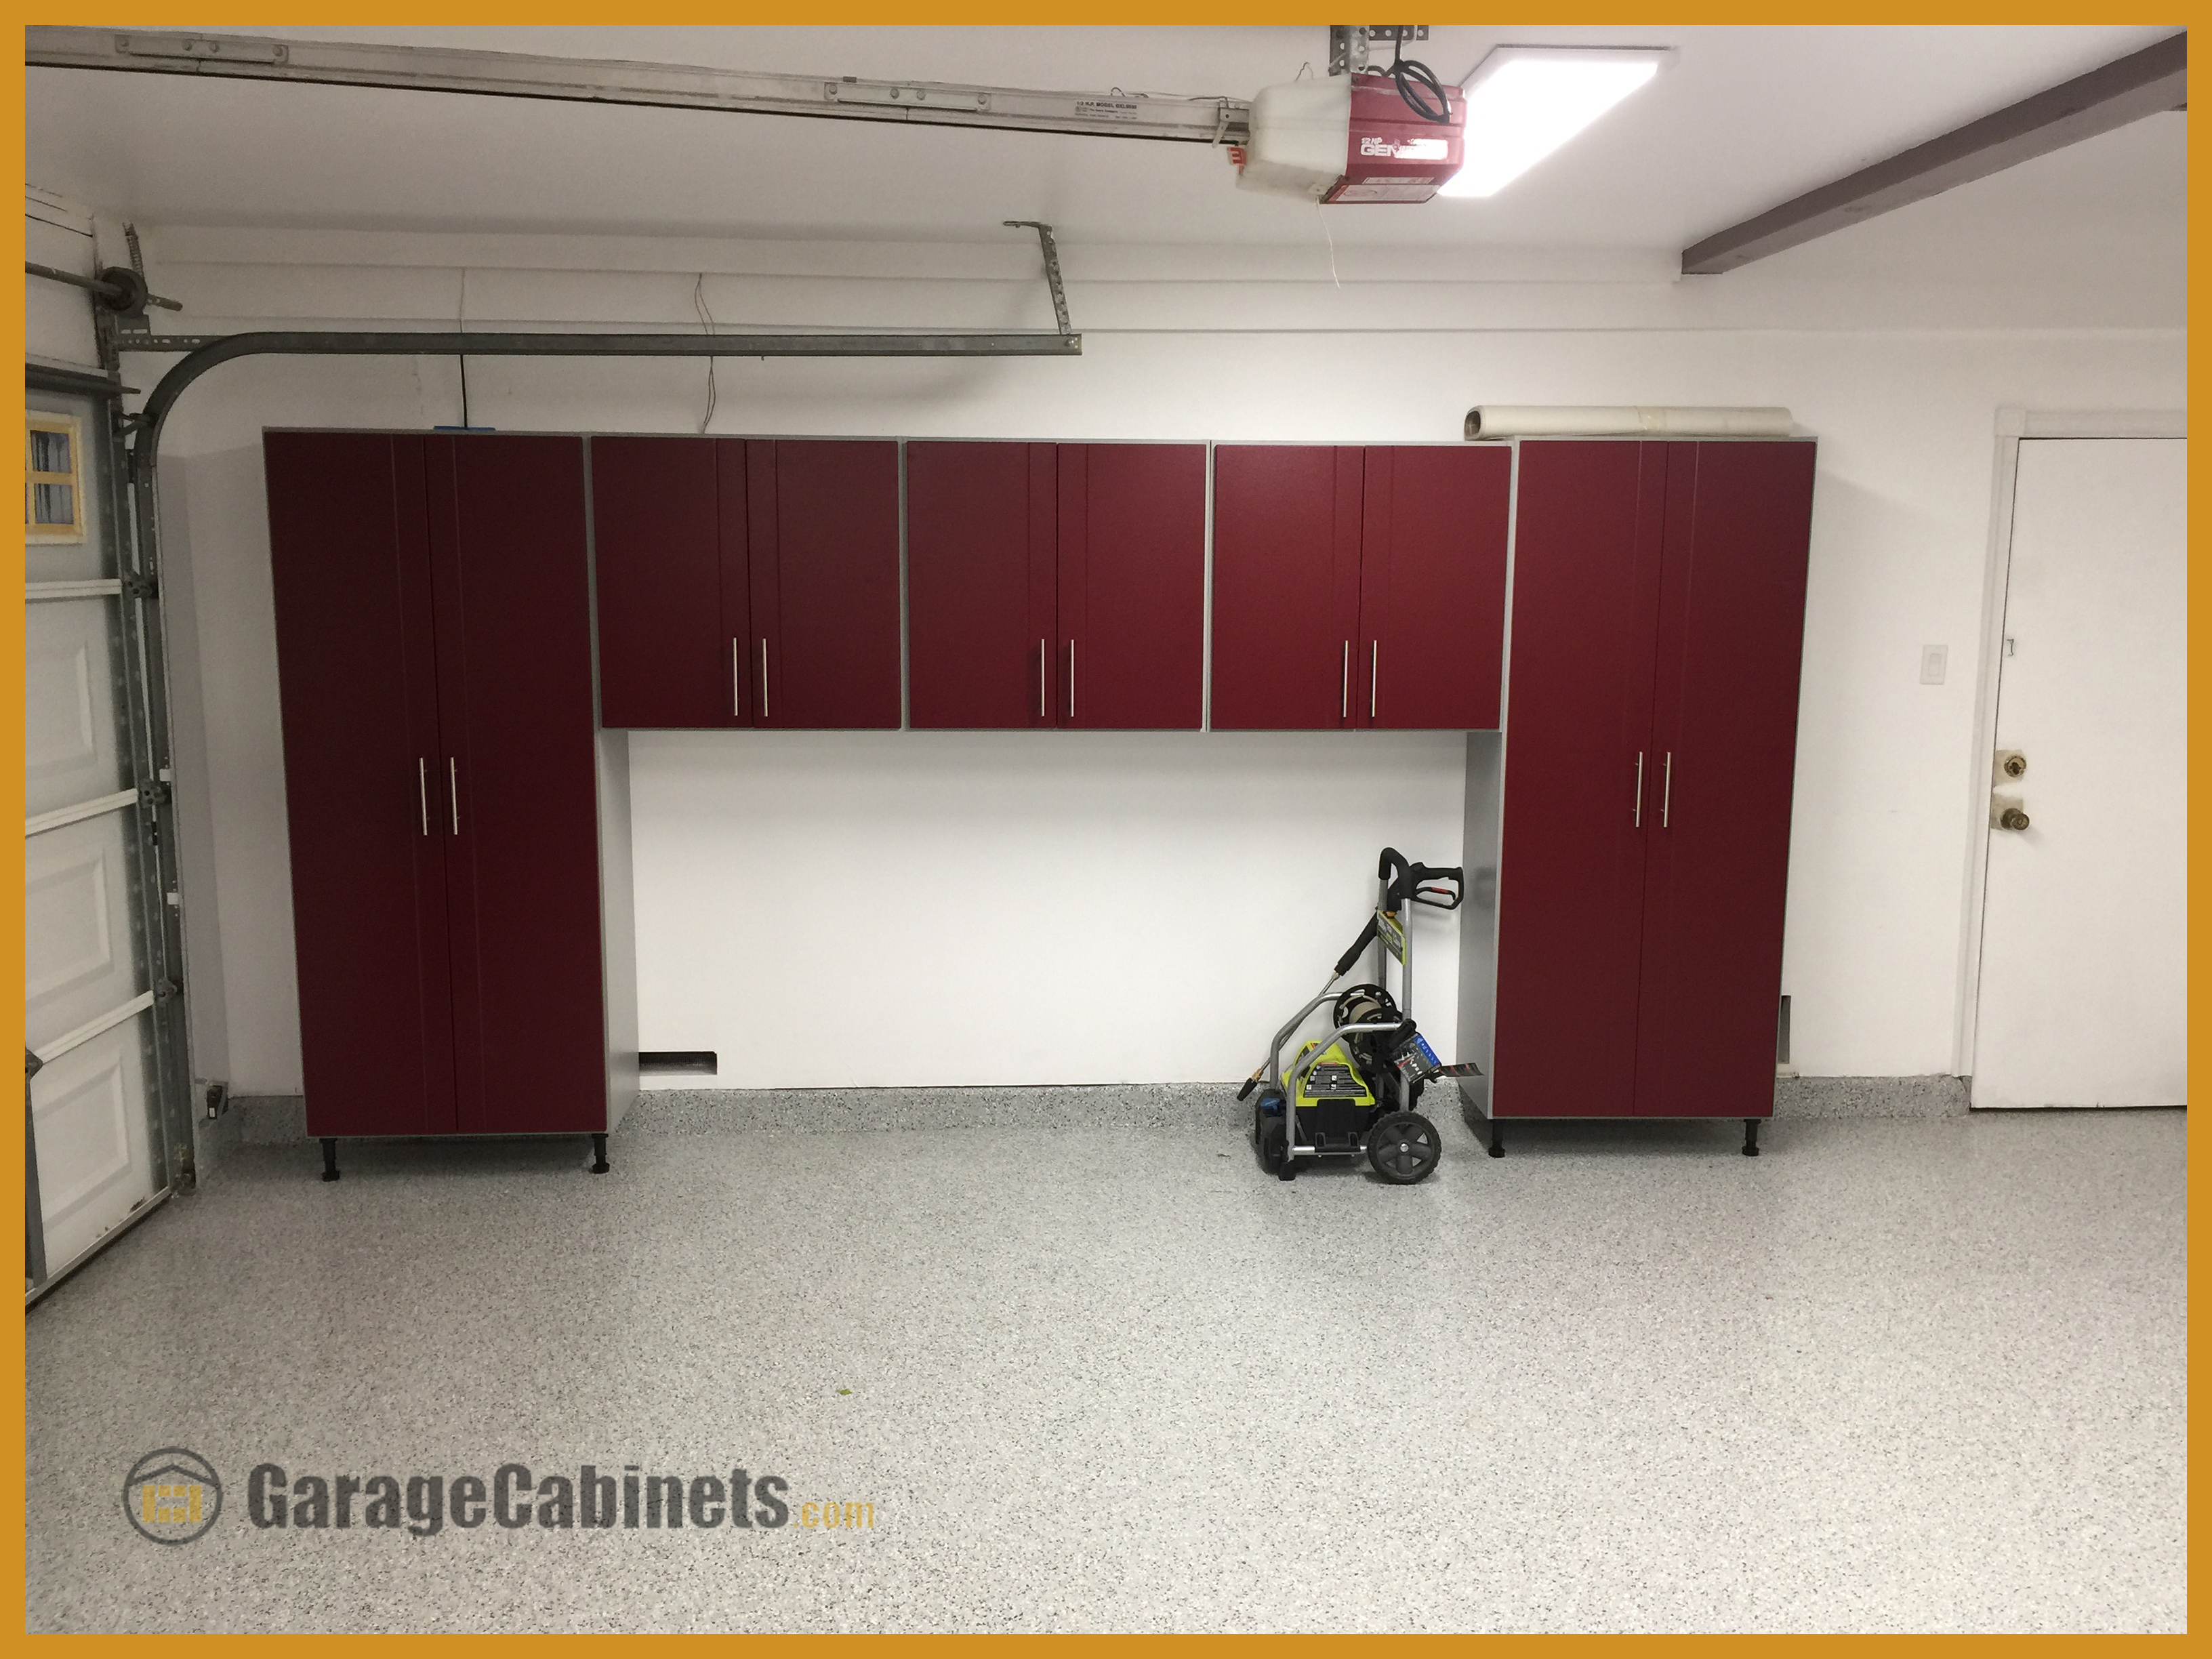 Full Wall of WorkSpace Garage Cabinets in the Multipurpose Garage